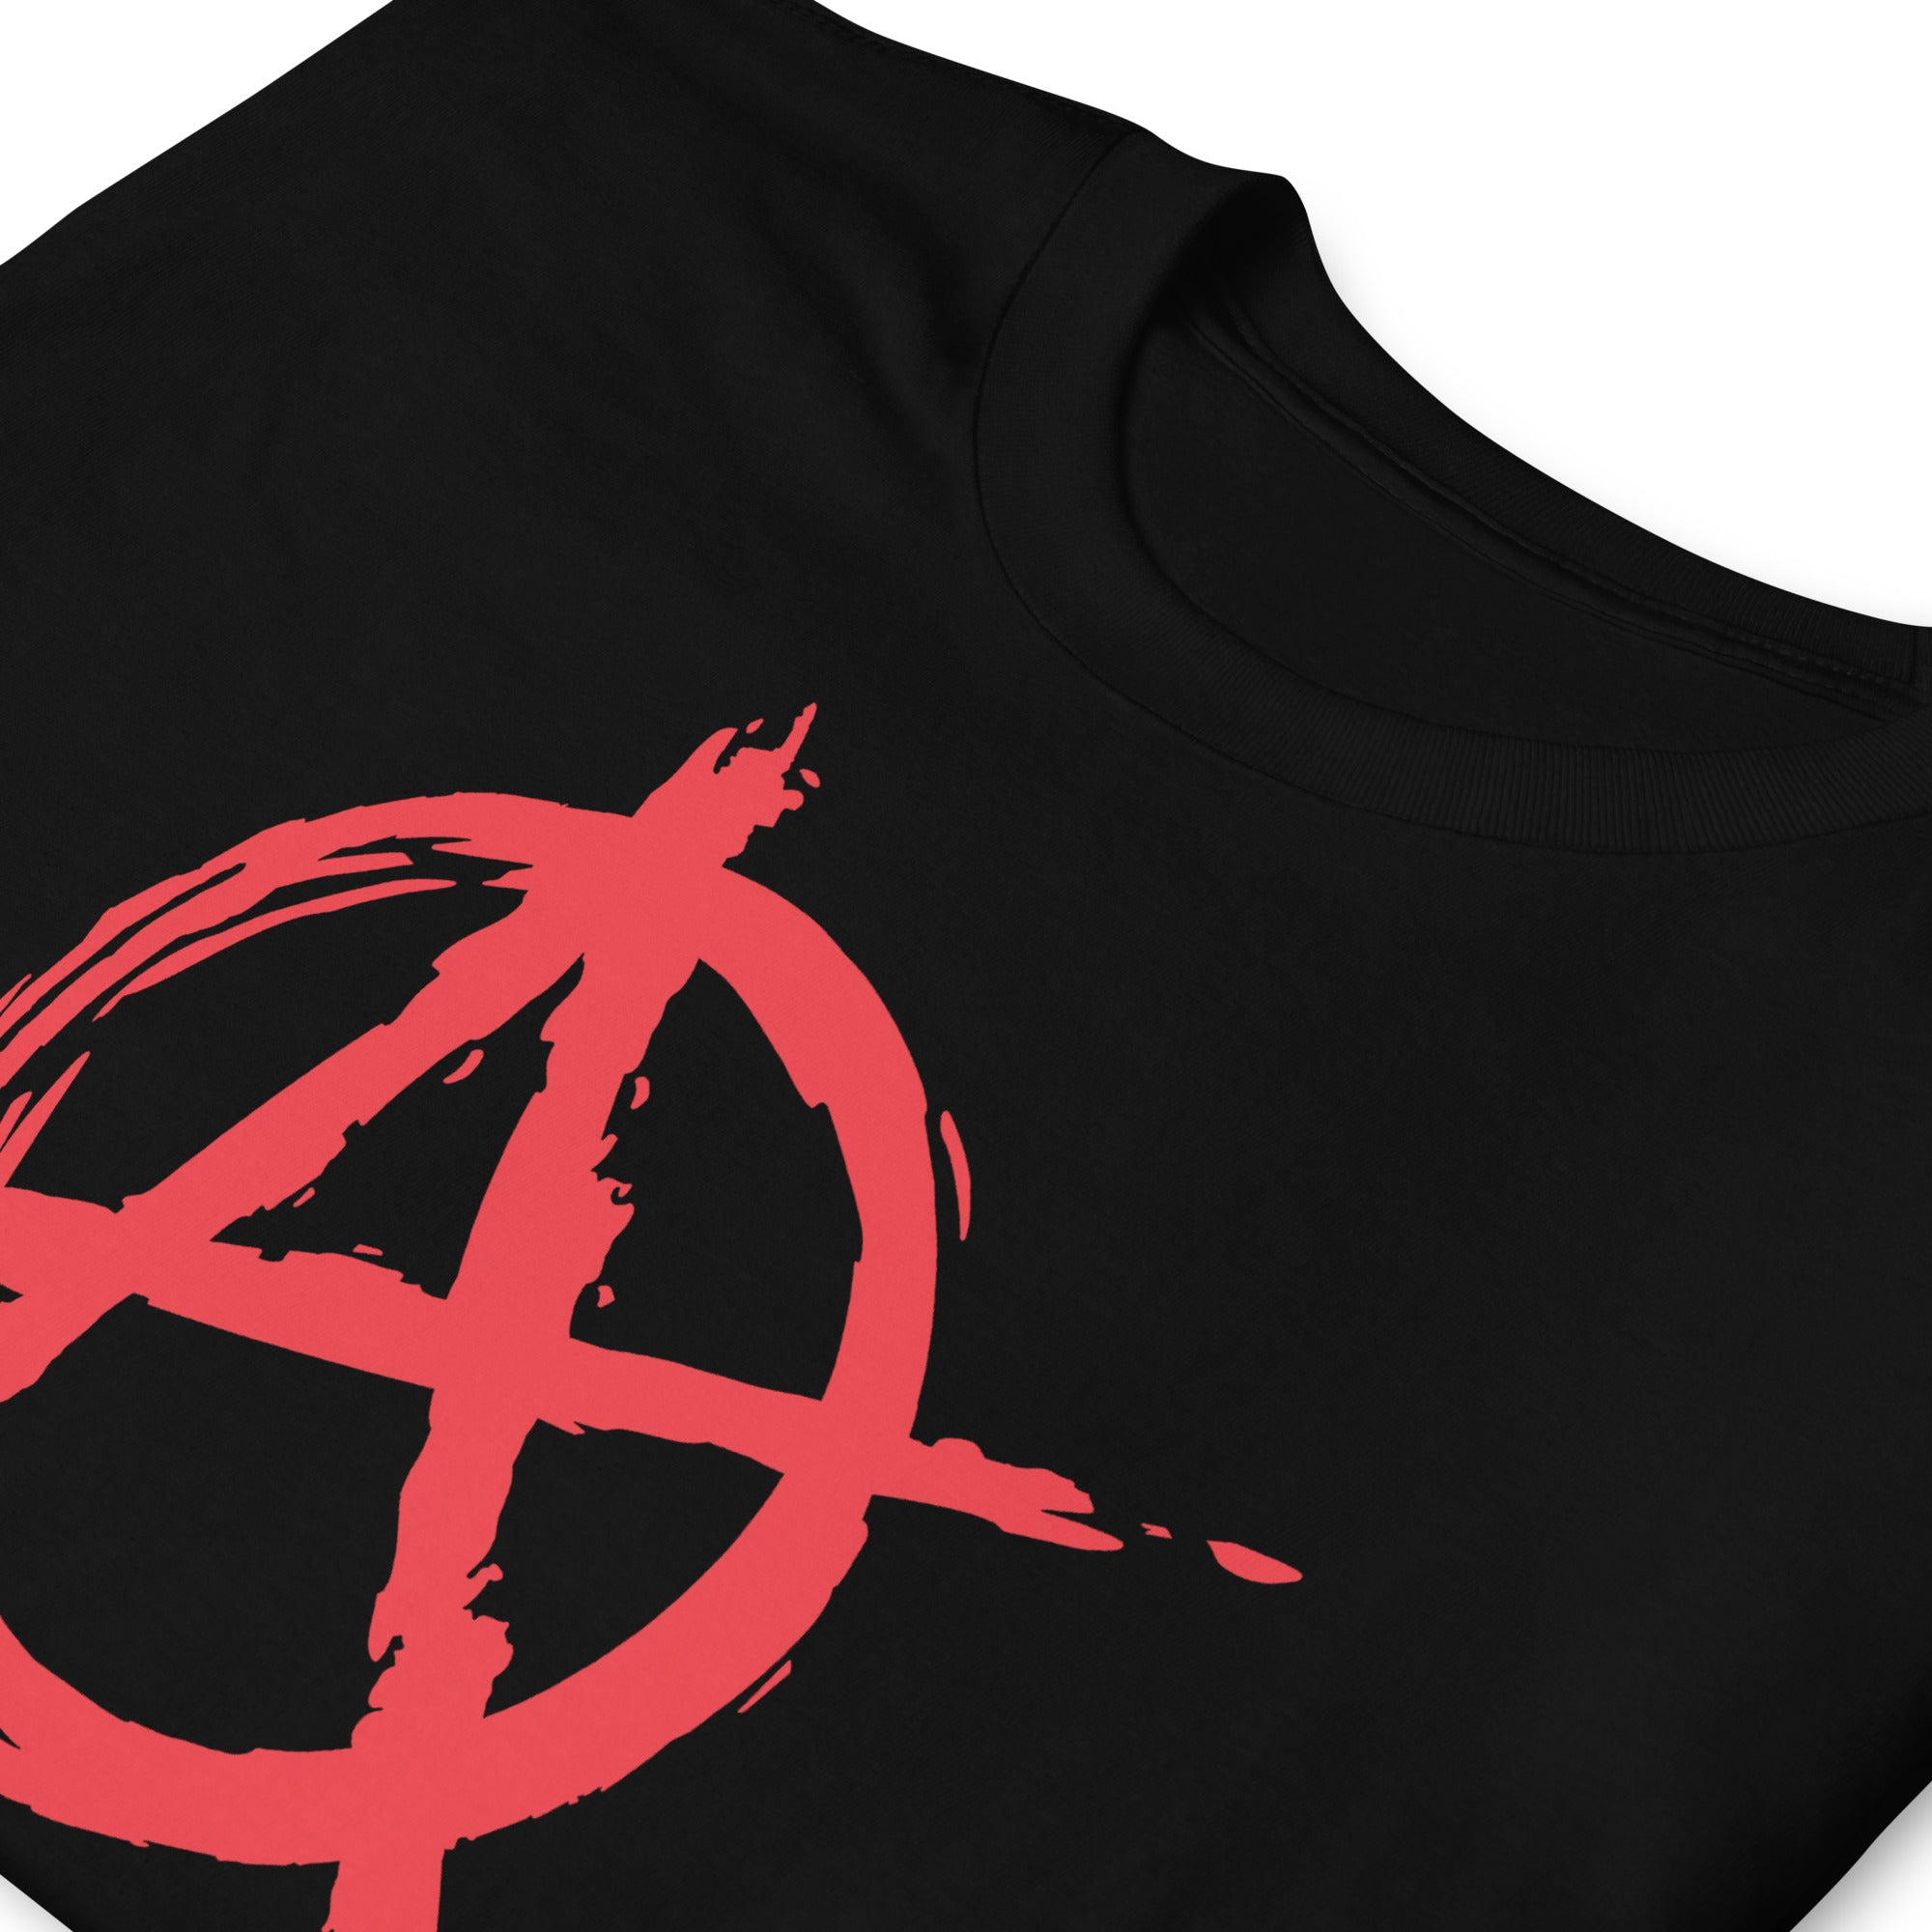 Red Anarchy is Order Symbol Punk Rock Men's Short-Sleeve T-Shirt - Edge of Life Designs